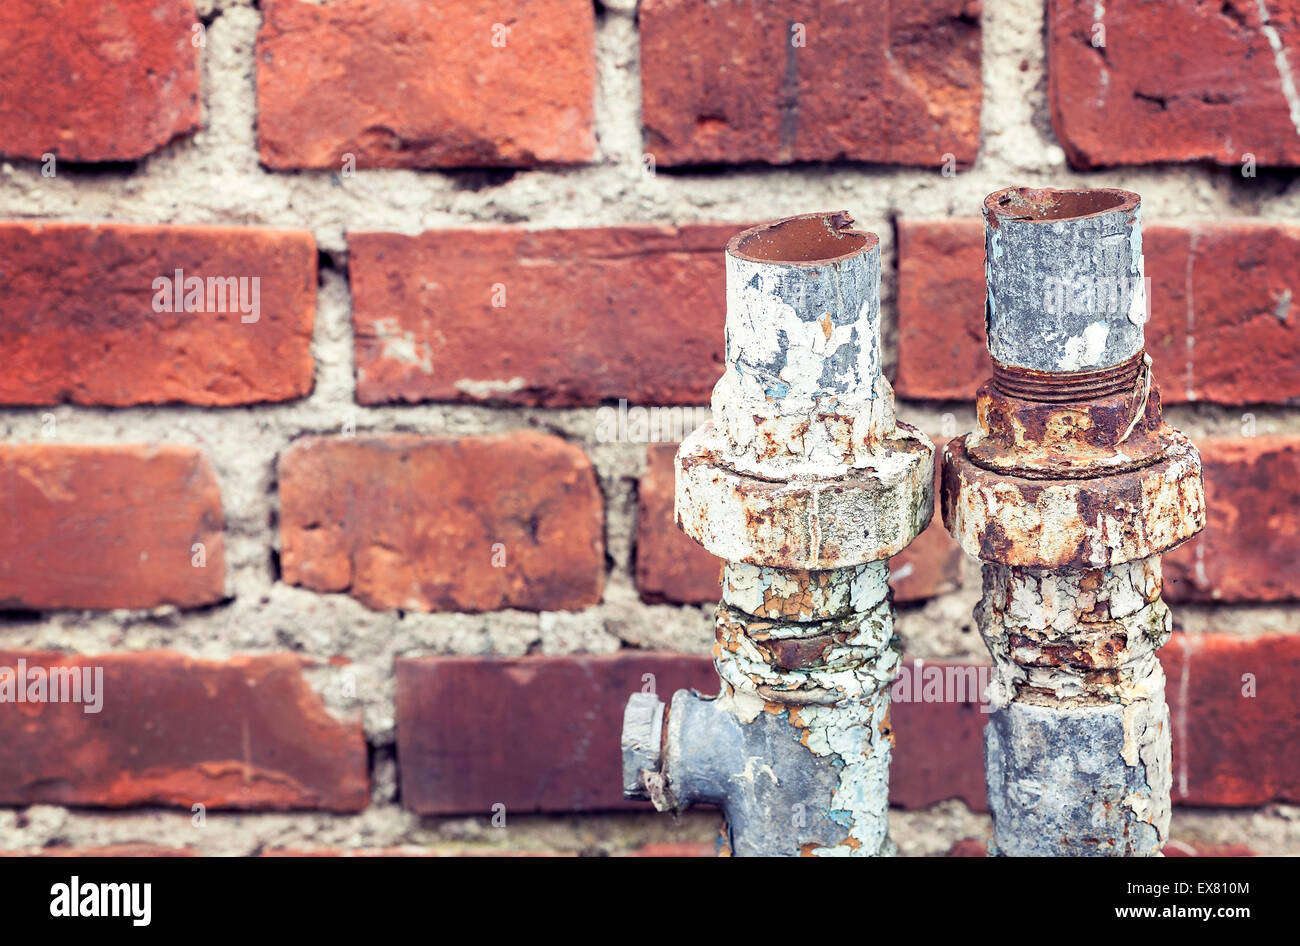 Old rusty cut pipes on a brick wall background. Stock Photo